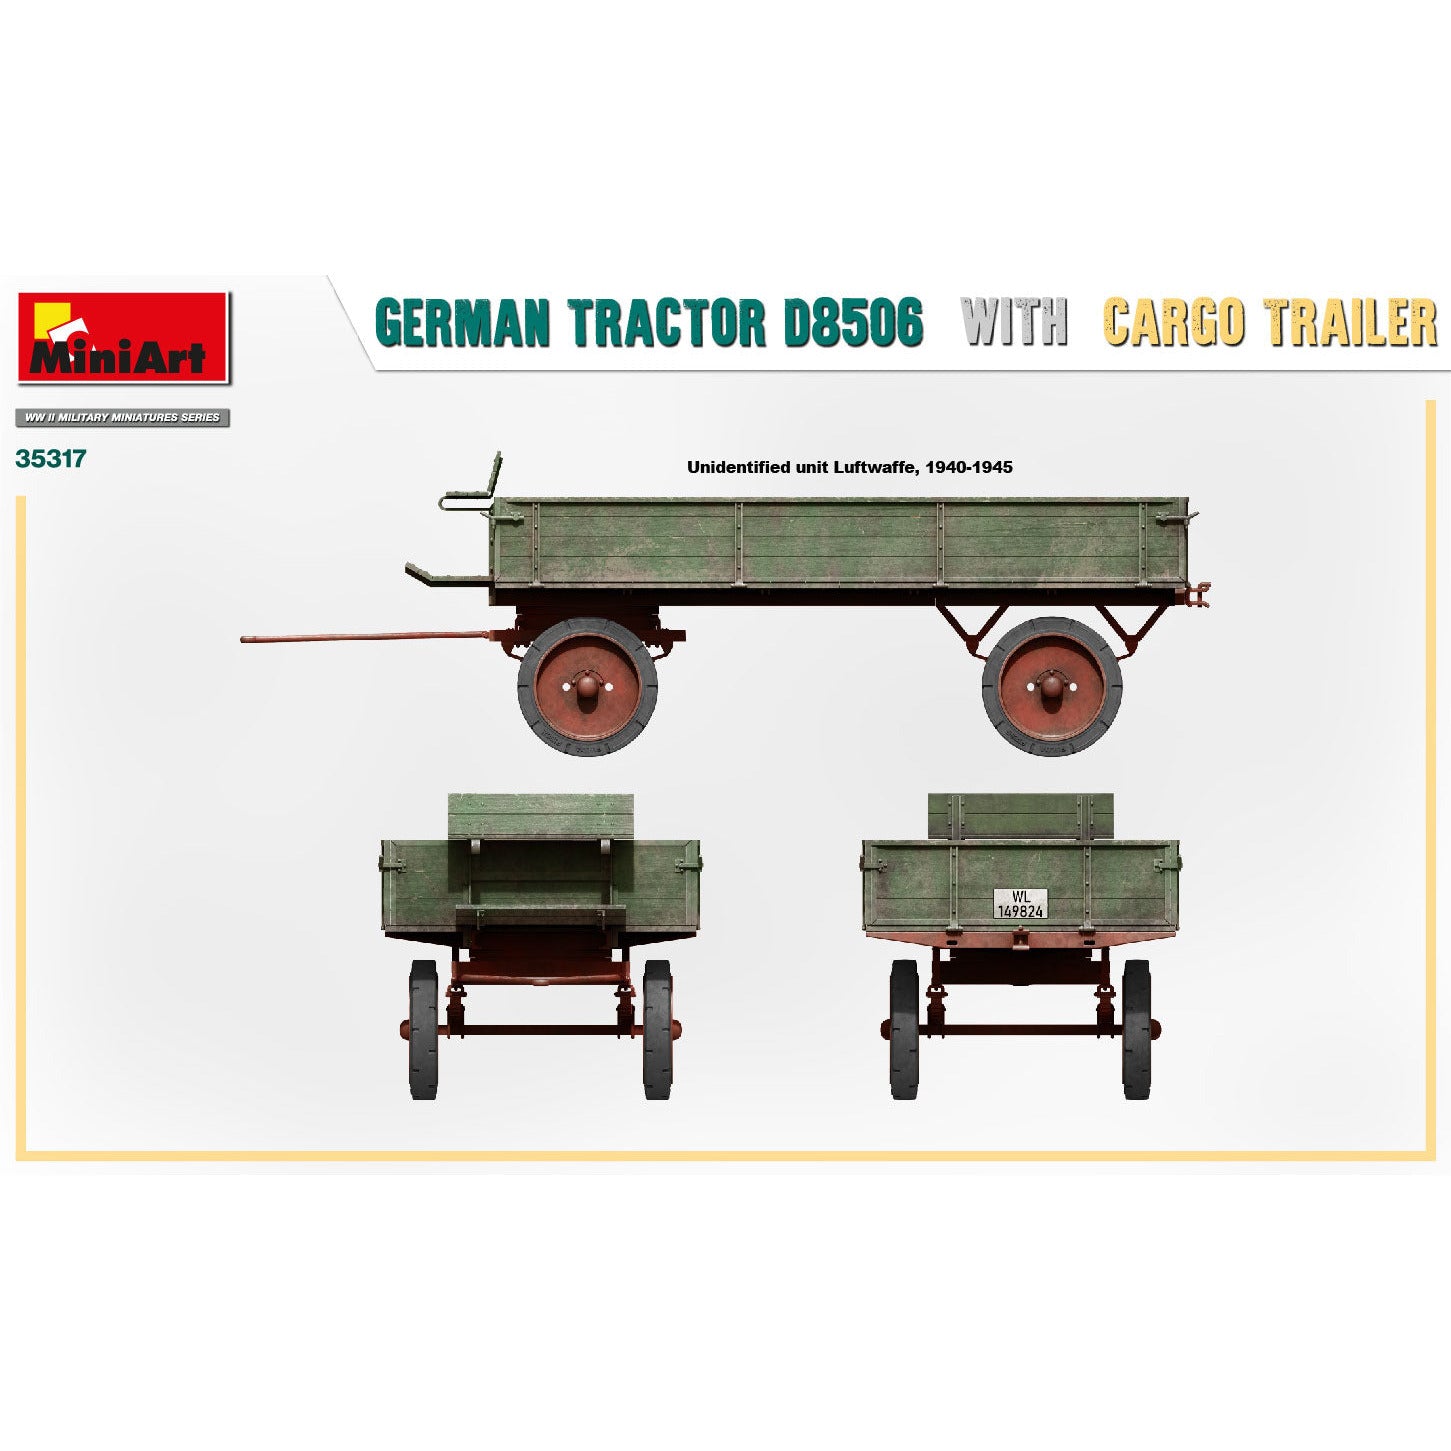 MINIART 1/35 German Tractor D8506 with Cargo Trailer